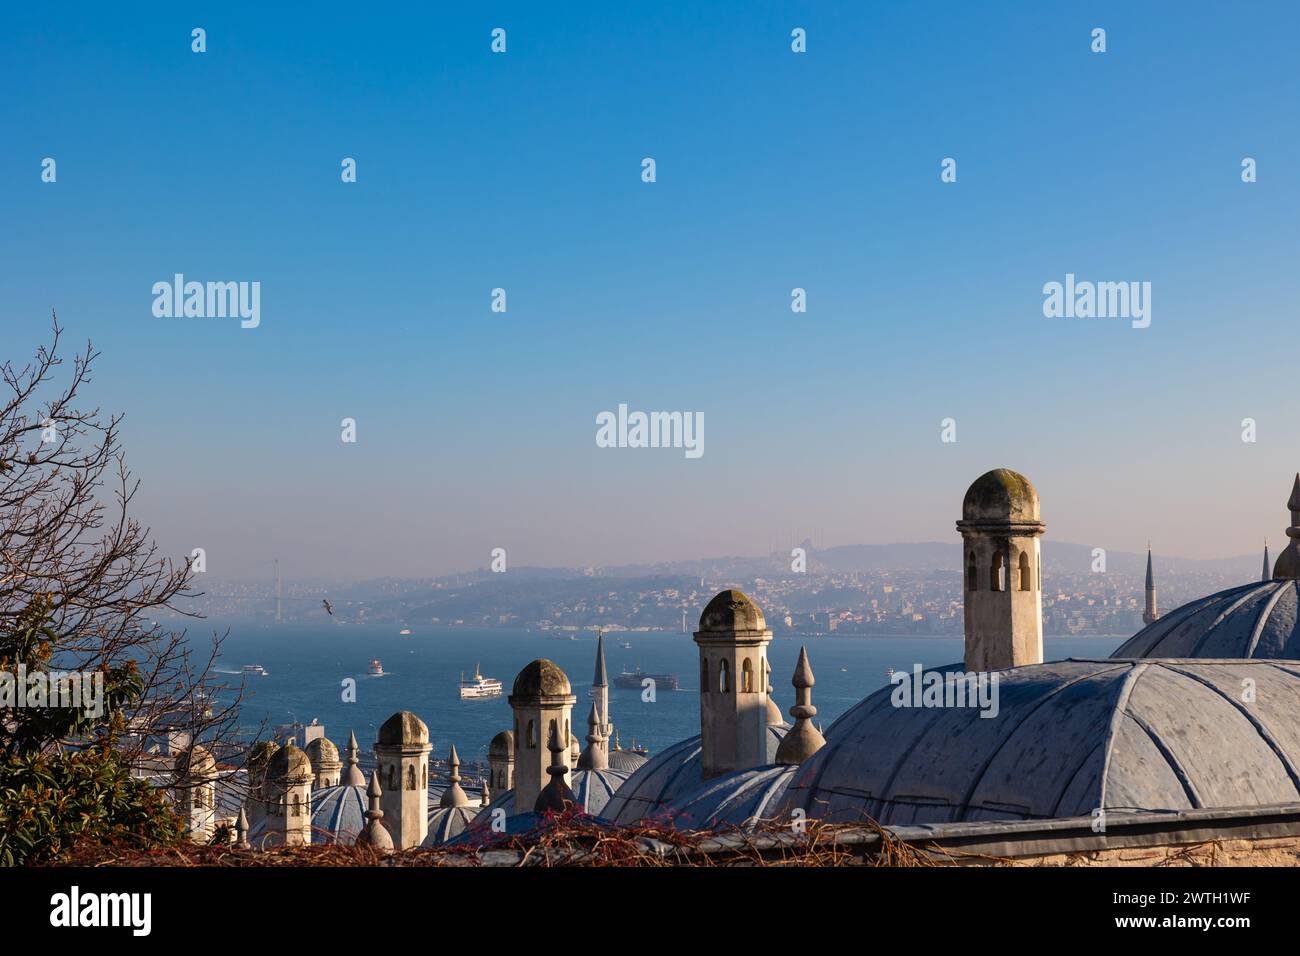 Istanbul view from Suleymaniye Mosque's garden. Bosphorus and anatolian side of Istanbul on the background. Stock Photo